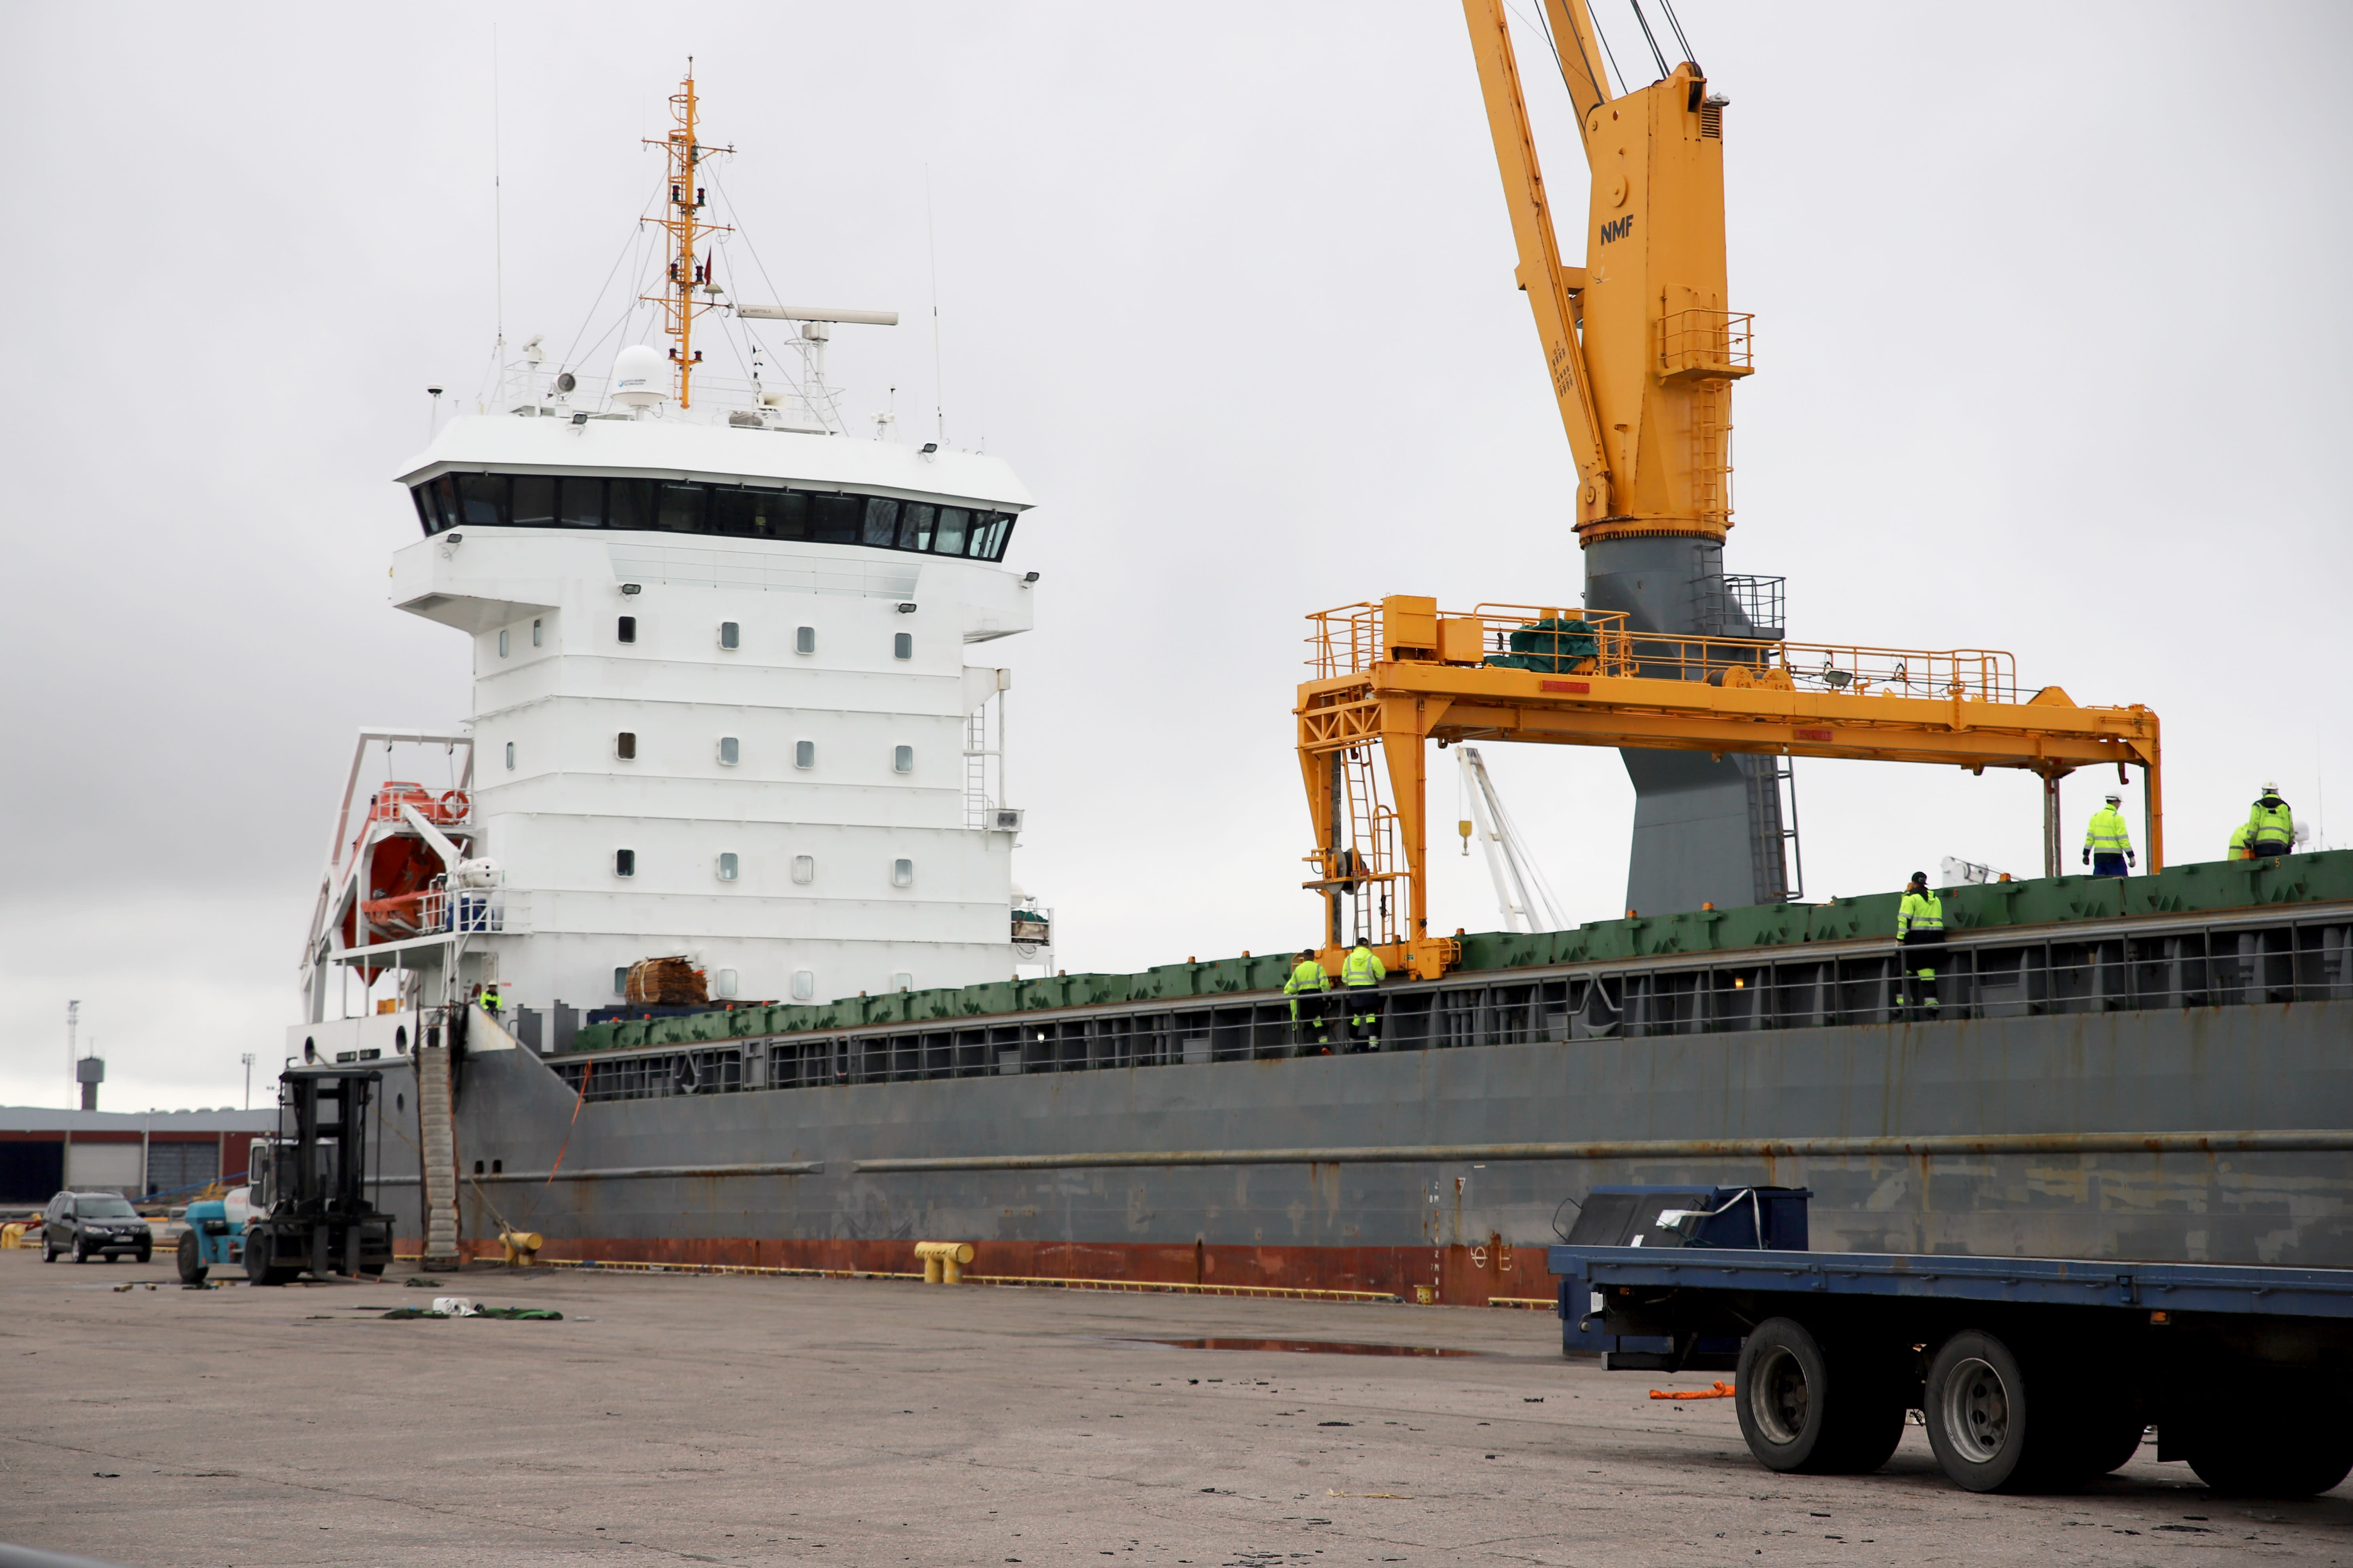 A large Finnish port that converts wastewater from cargo ships into biogas